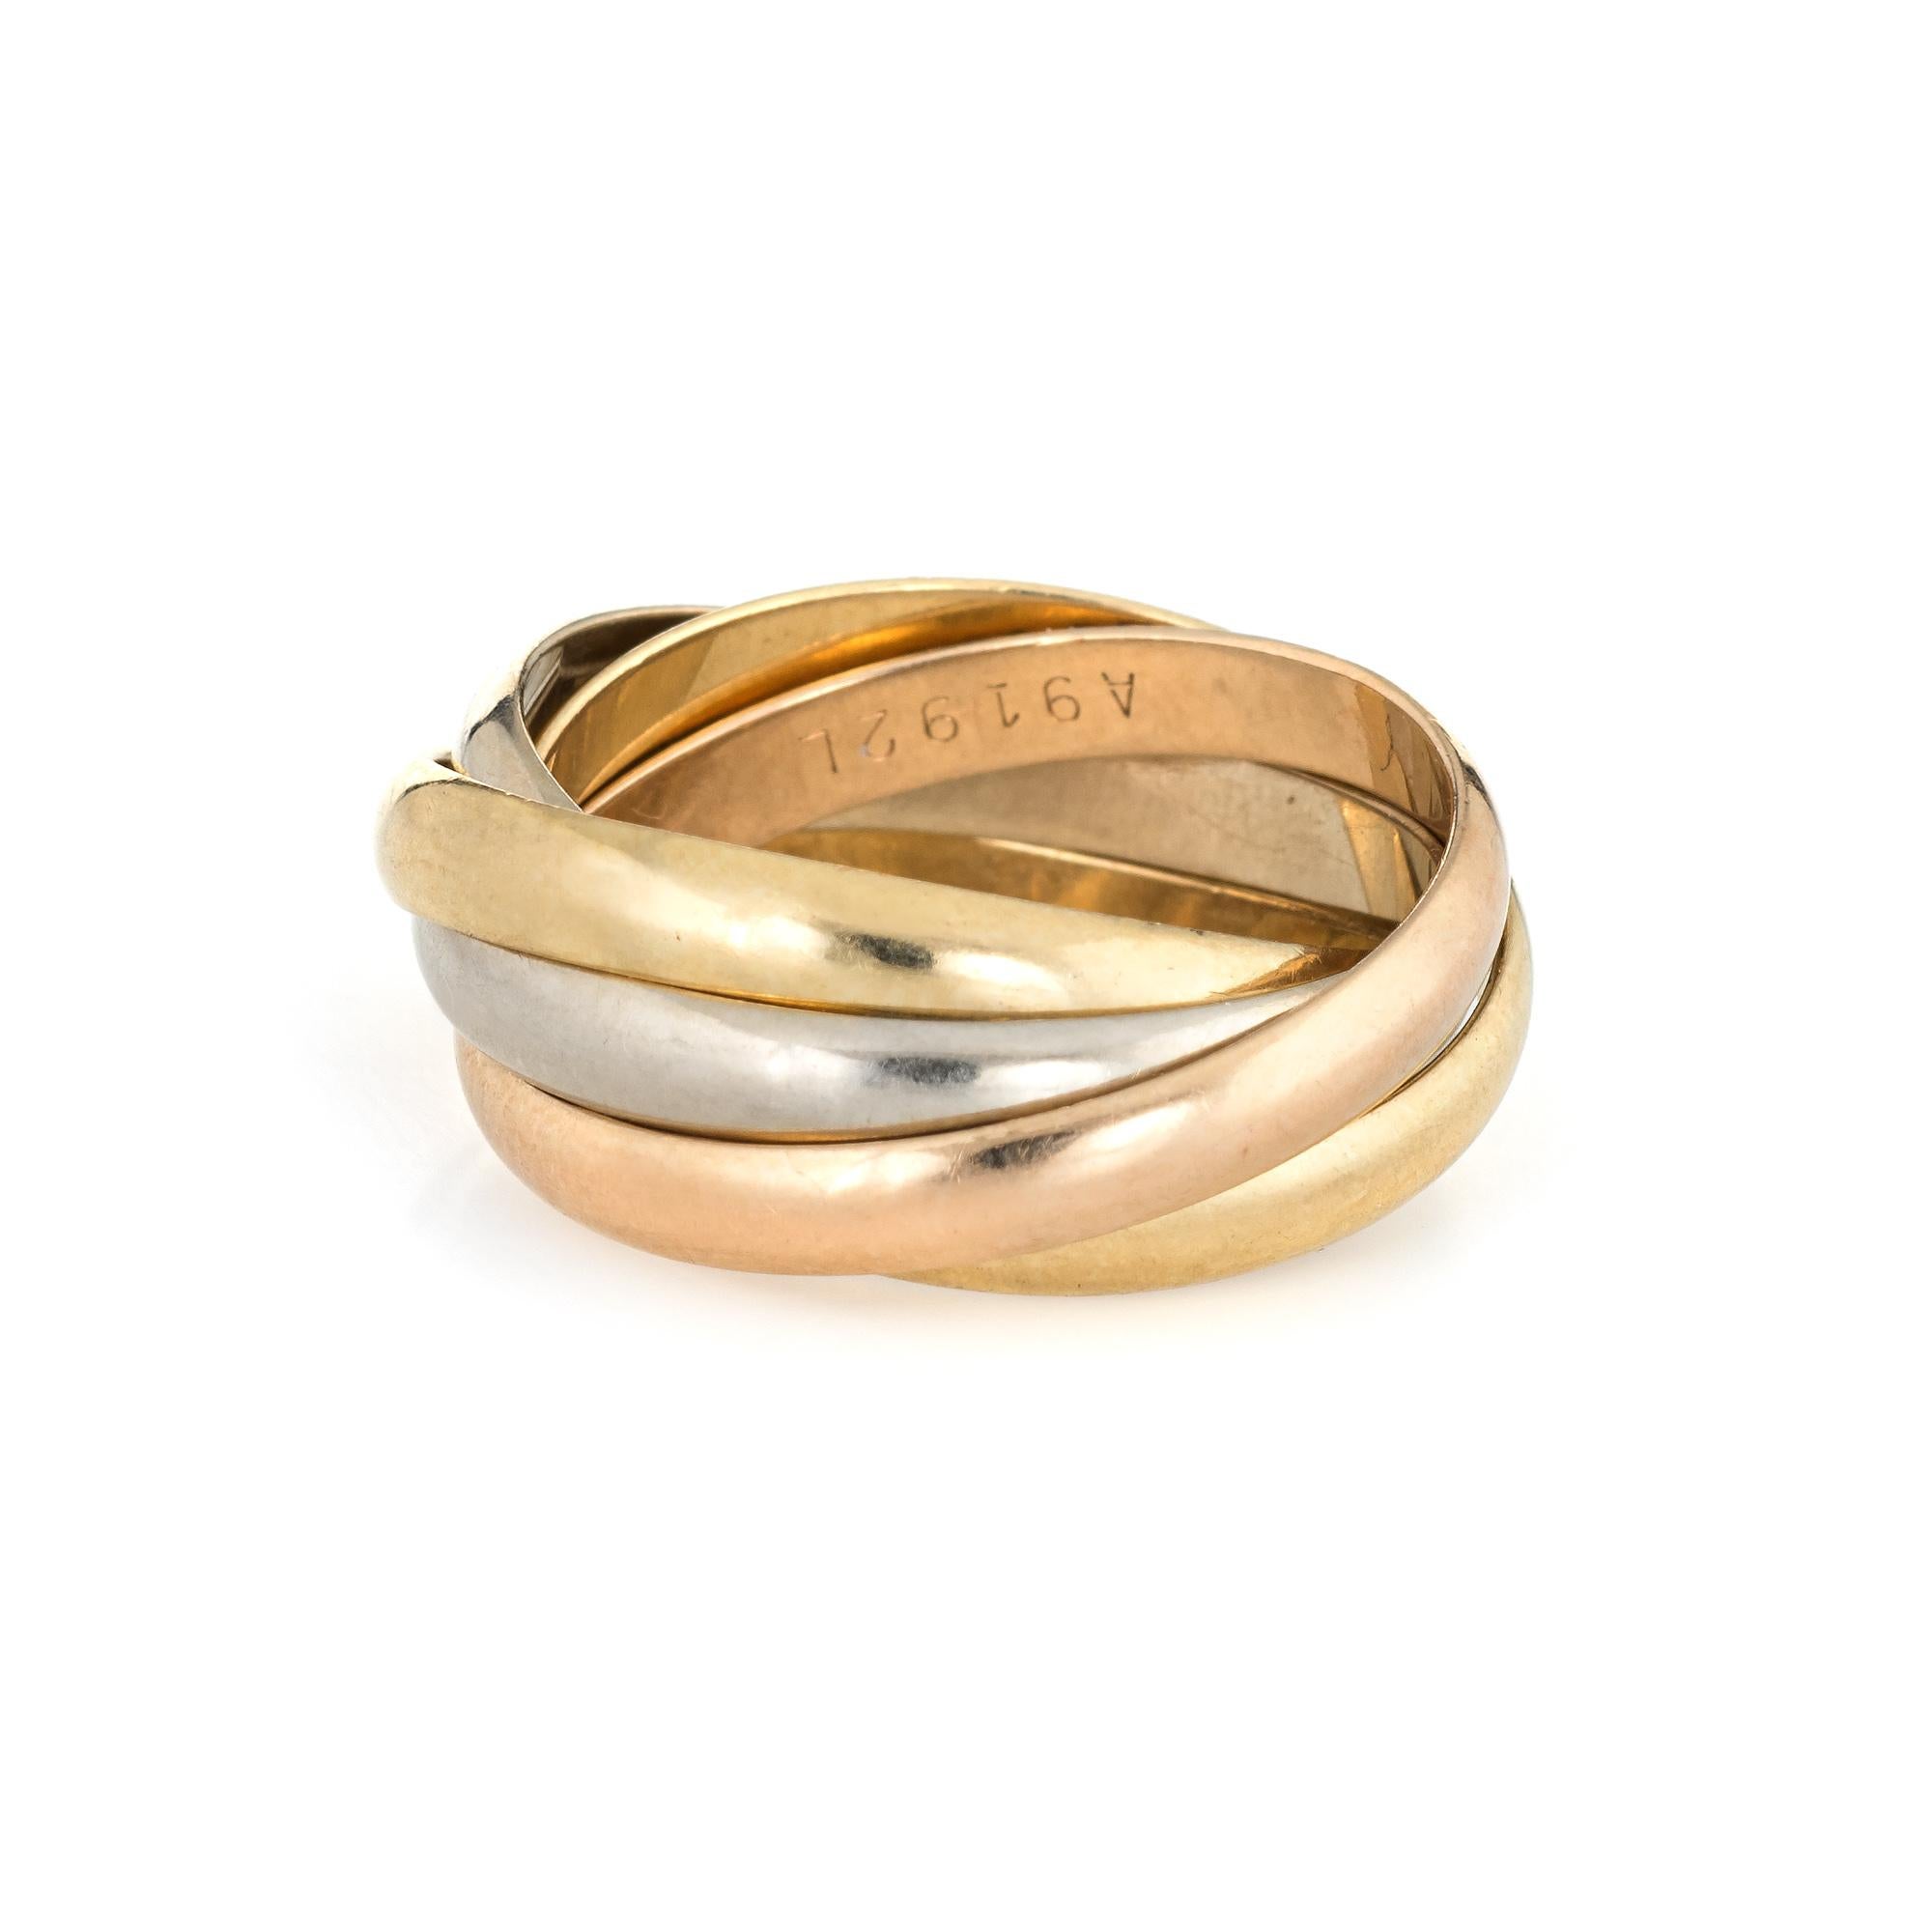 Pre owned les must de Cartier Trinity 5 band ring crafted in 18 karat yellow, rose and white gold.  

The ring features five bands with 2 yellow gold, 2 white and 1 rose gold. Each of the bands measure 3mm.

The ring is in very good condition. We